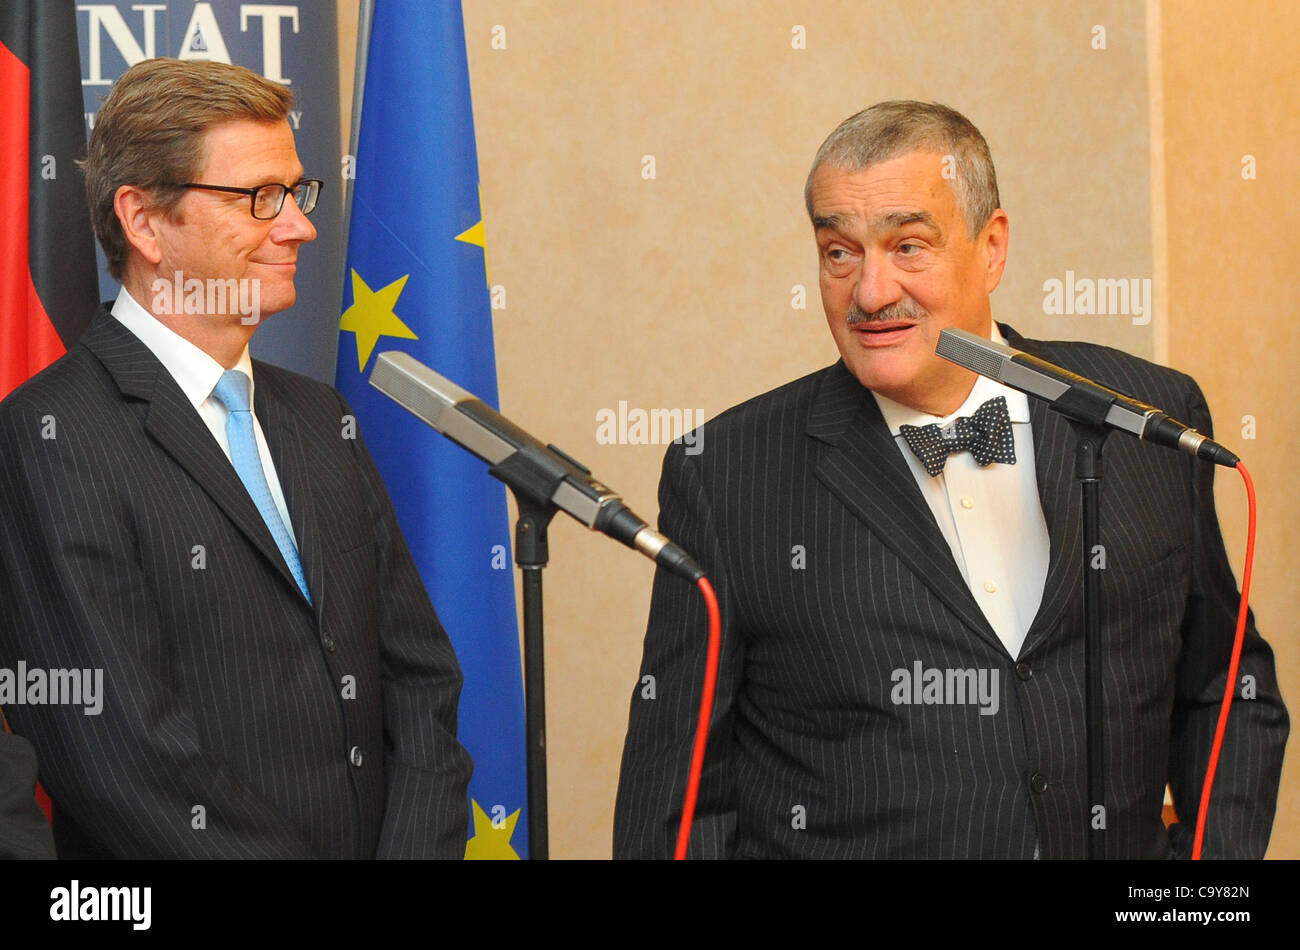 German Foreign Minister Guido Westerwelle (left) and his Czech counterpart Karel Schwarzenberg are seen during a press conference to mark the 20th anniversary of signing of the Treaty of 27 February 1992 on Good-neighbourliness and Friendly Cooperation between the Federal Republic of Germany and the Stock Photo